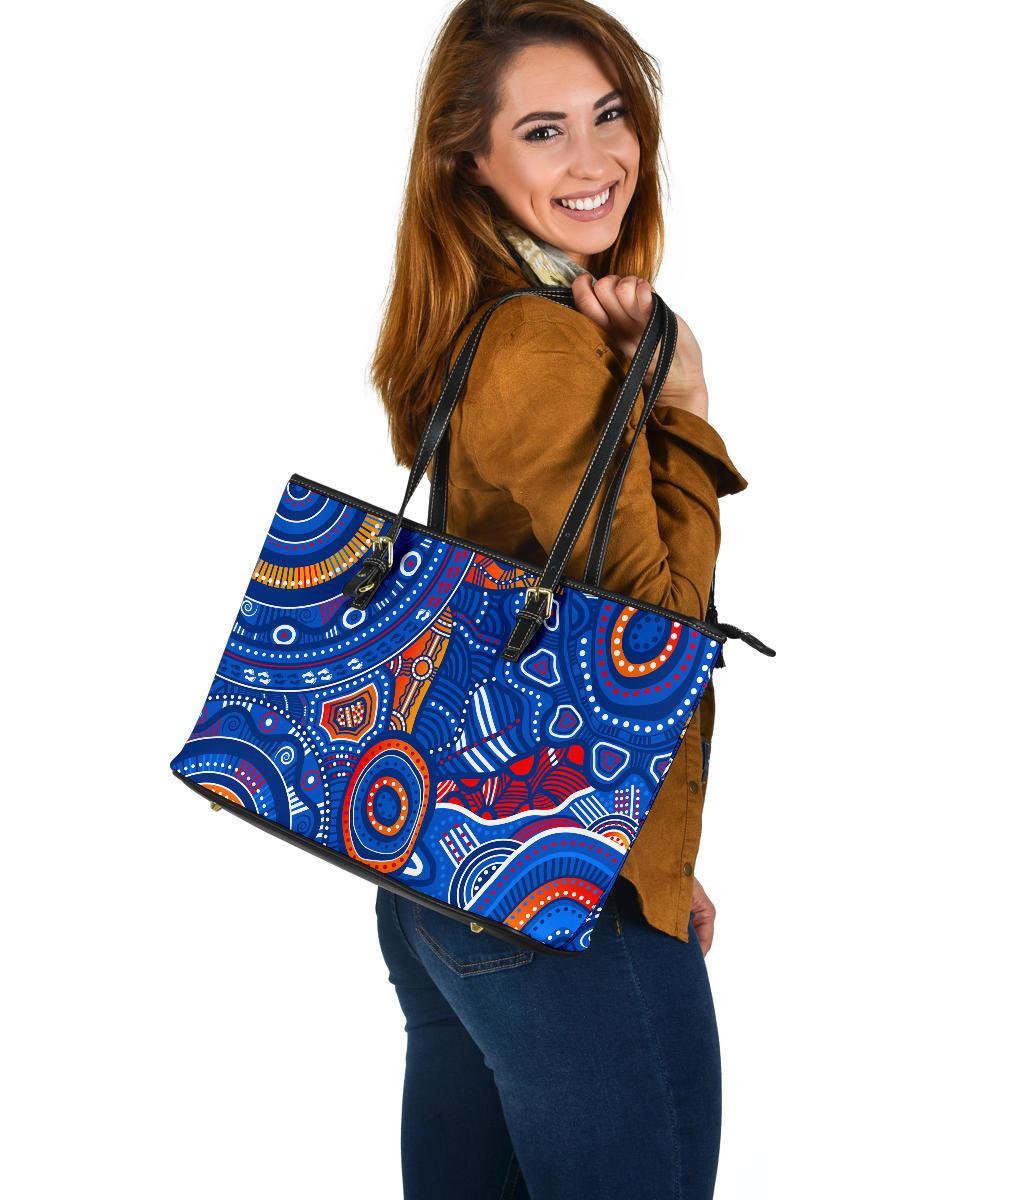 aboriginal-large-leather-tote-bags-indigenous-footprint-patterns-blue-color